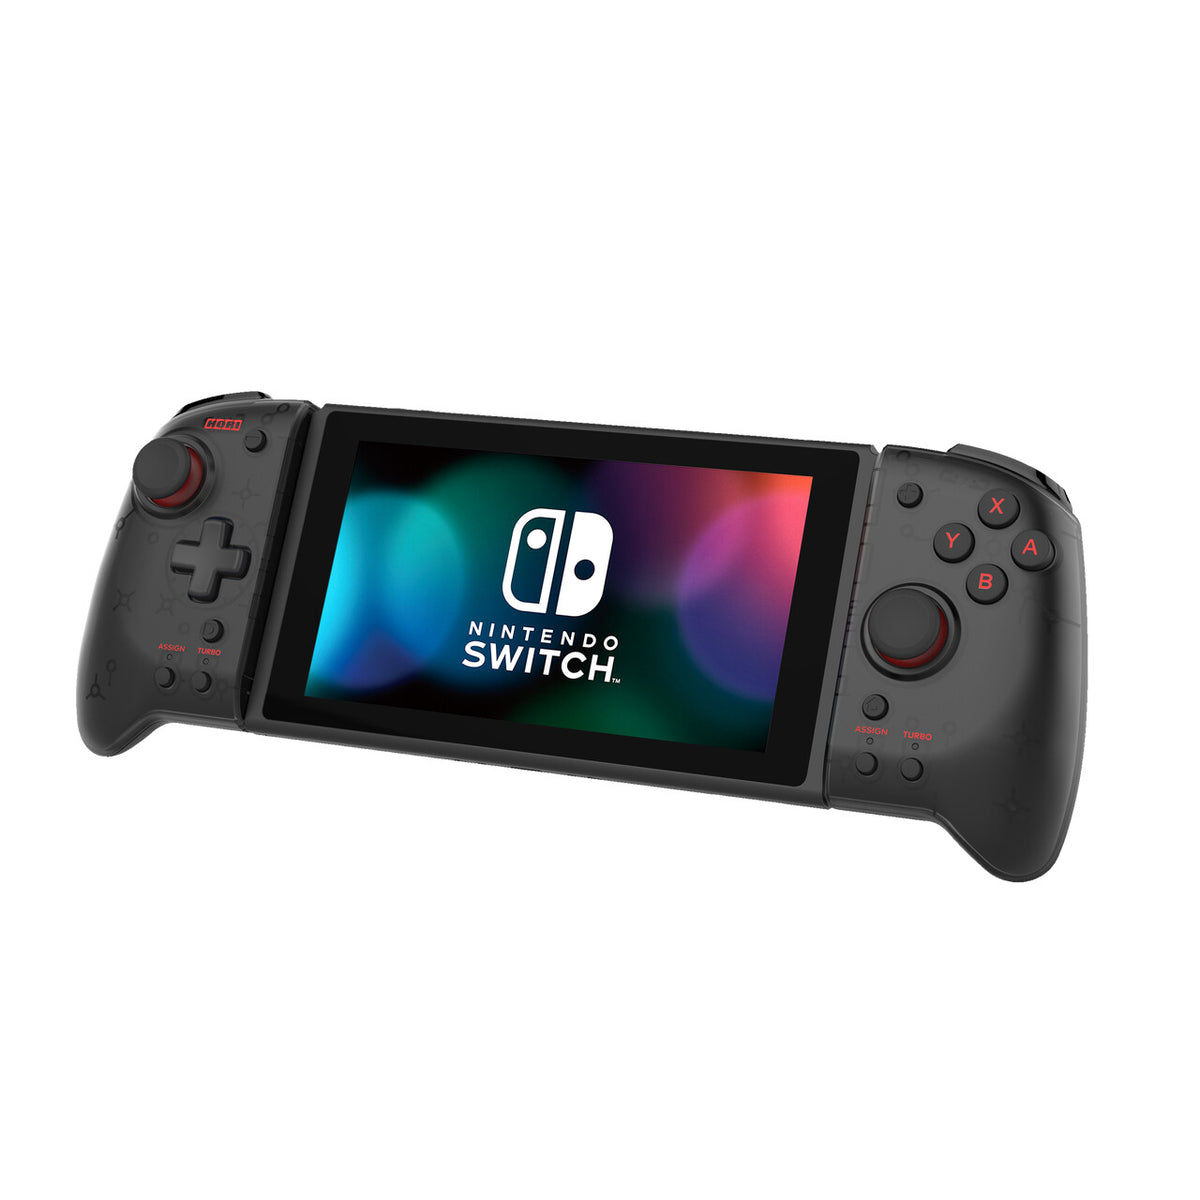 Hori Split Pad Pro -  Game Controllers for Nintendo Switch - Transparent Black Edition